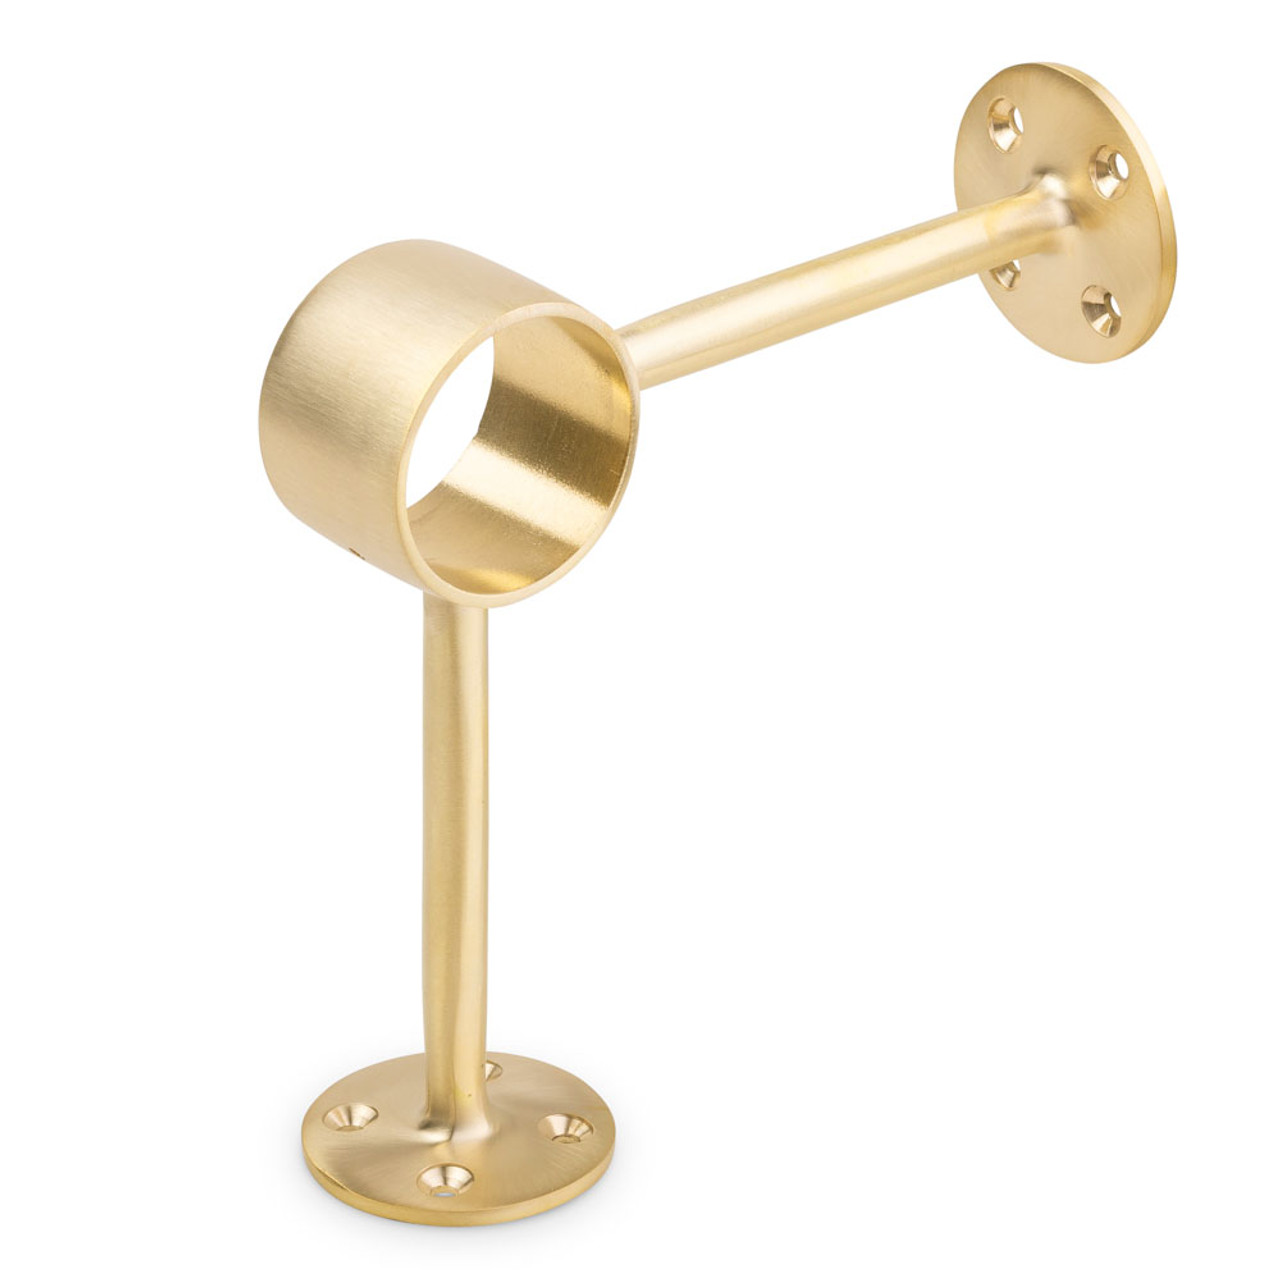 Lavi Industries 2 Bar Bracket, Satin Stainless Steel, Solid Brass &  Stainless Steel Fittings